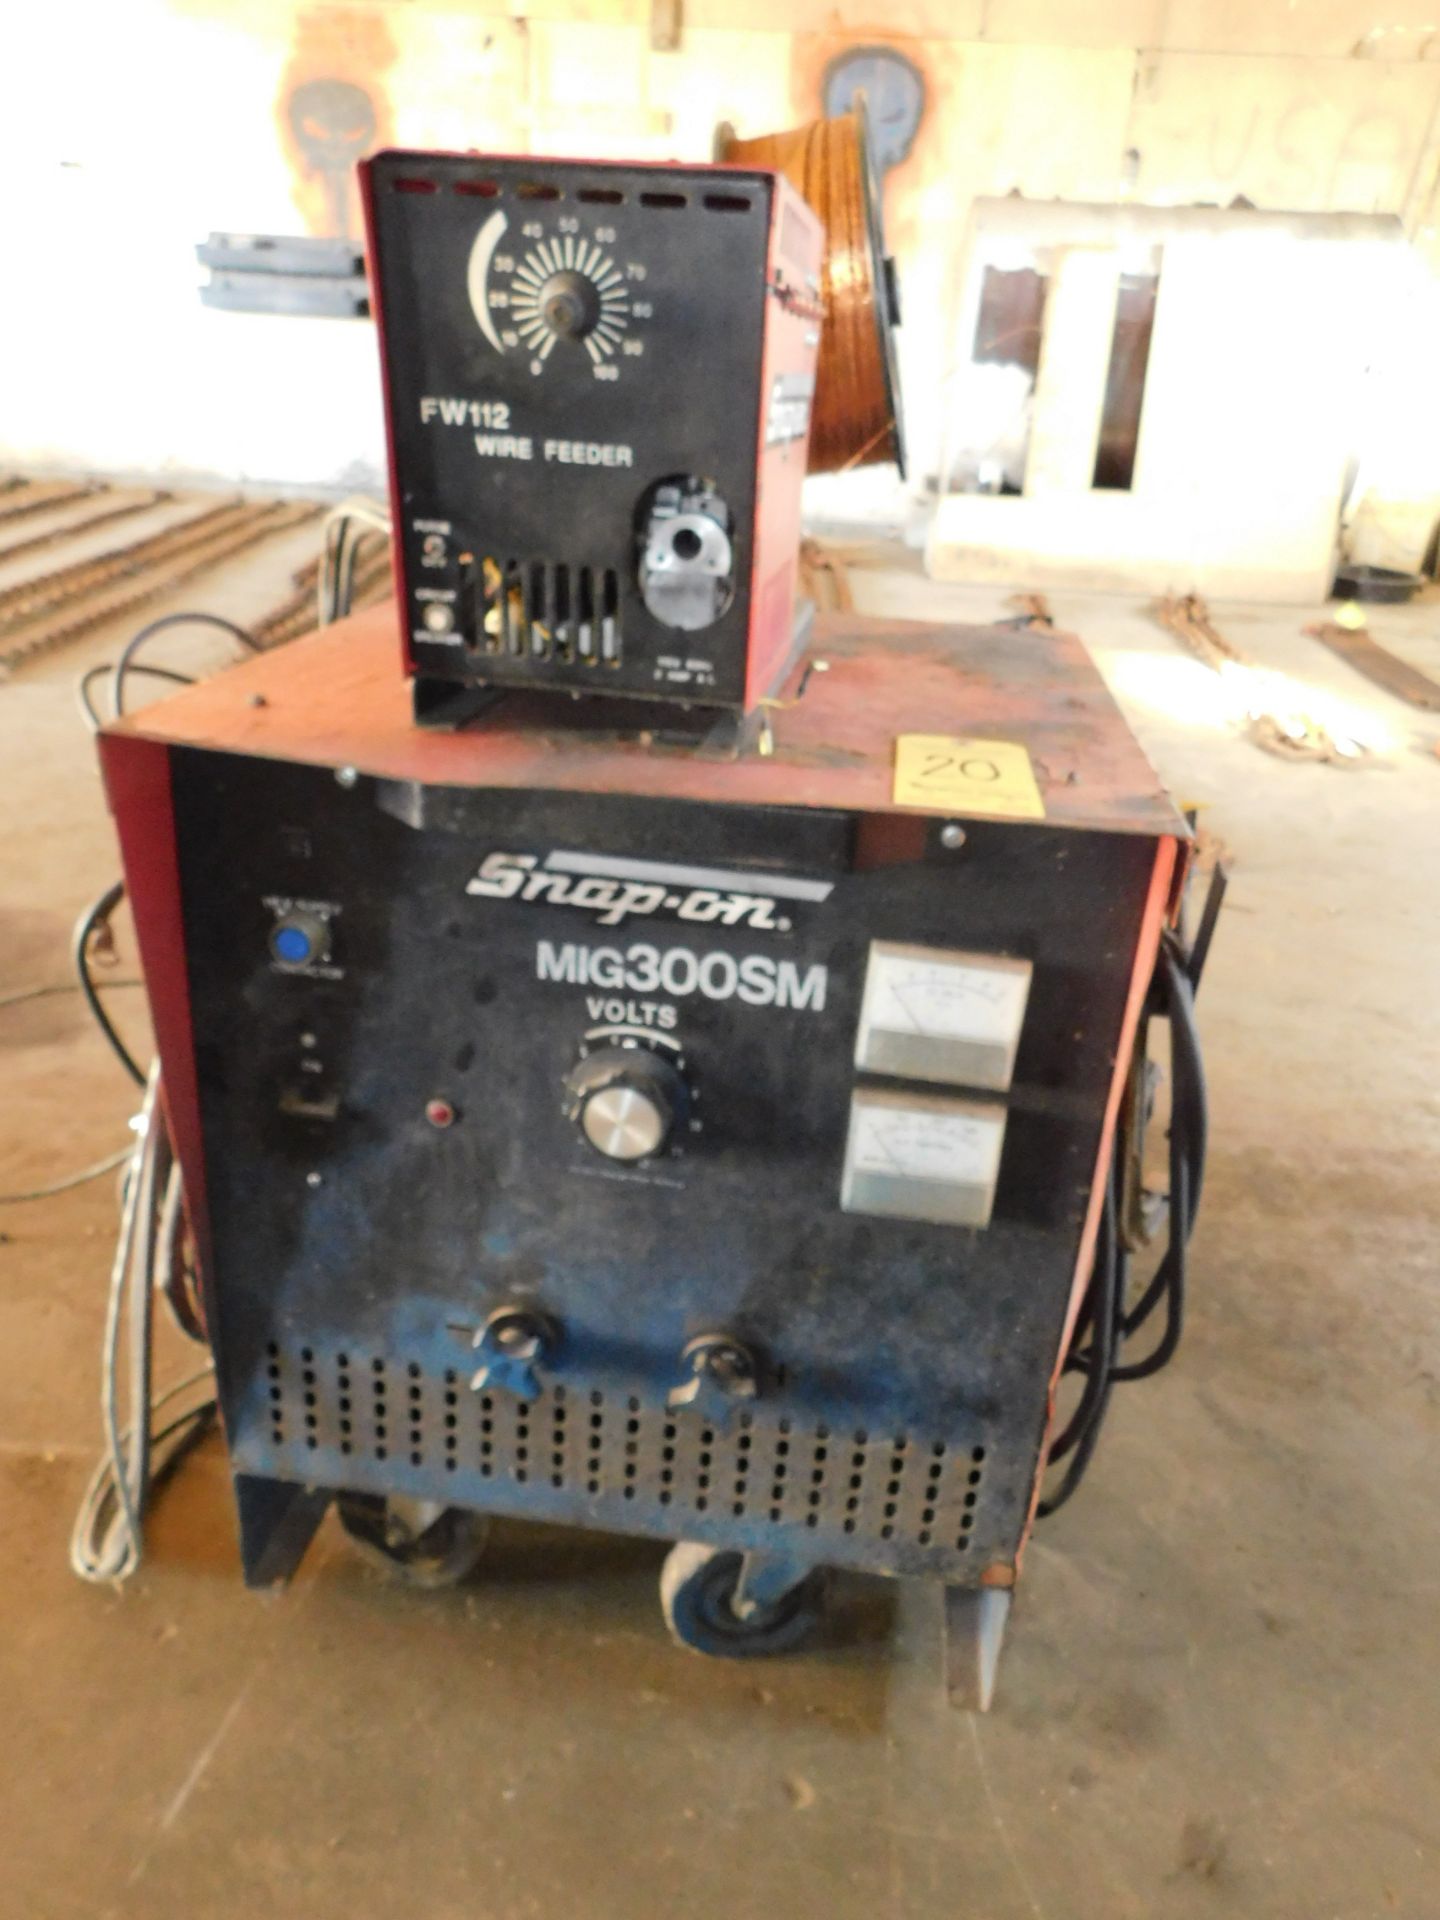 Snap-On Model MIG 300 SM Mig welder with Snap-On Model FW112 wire feeder